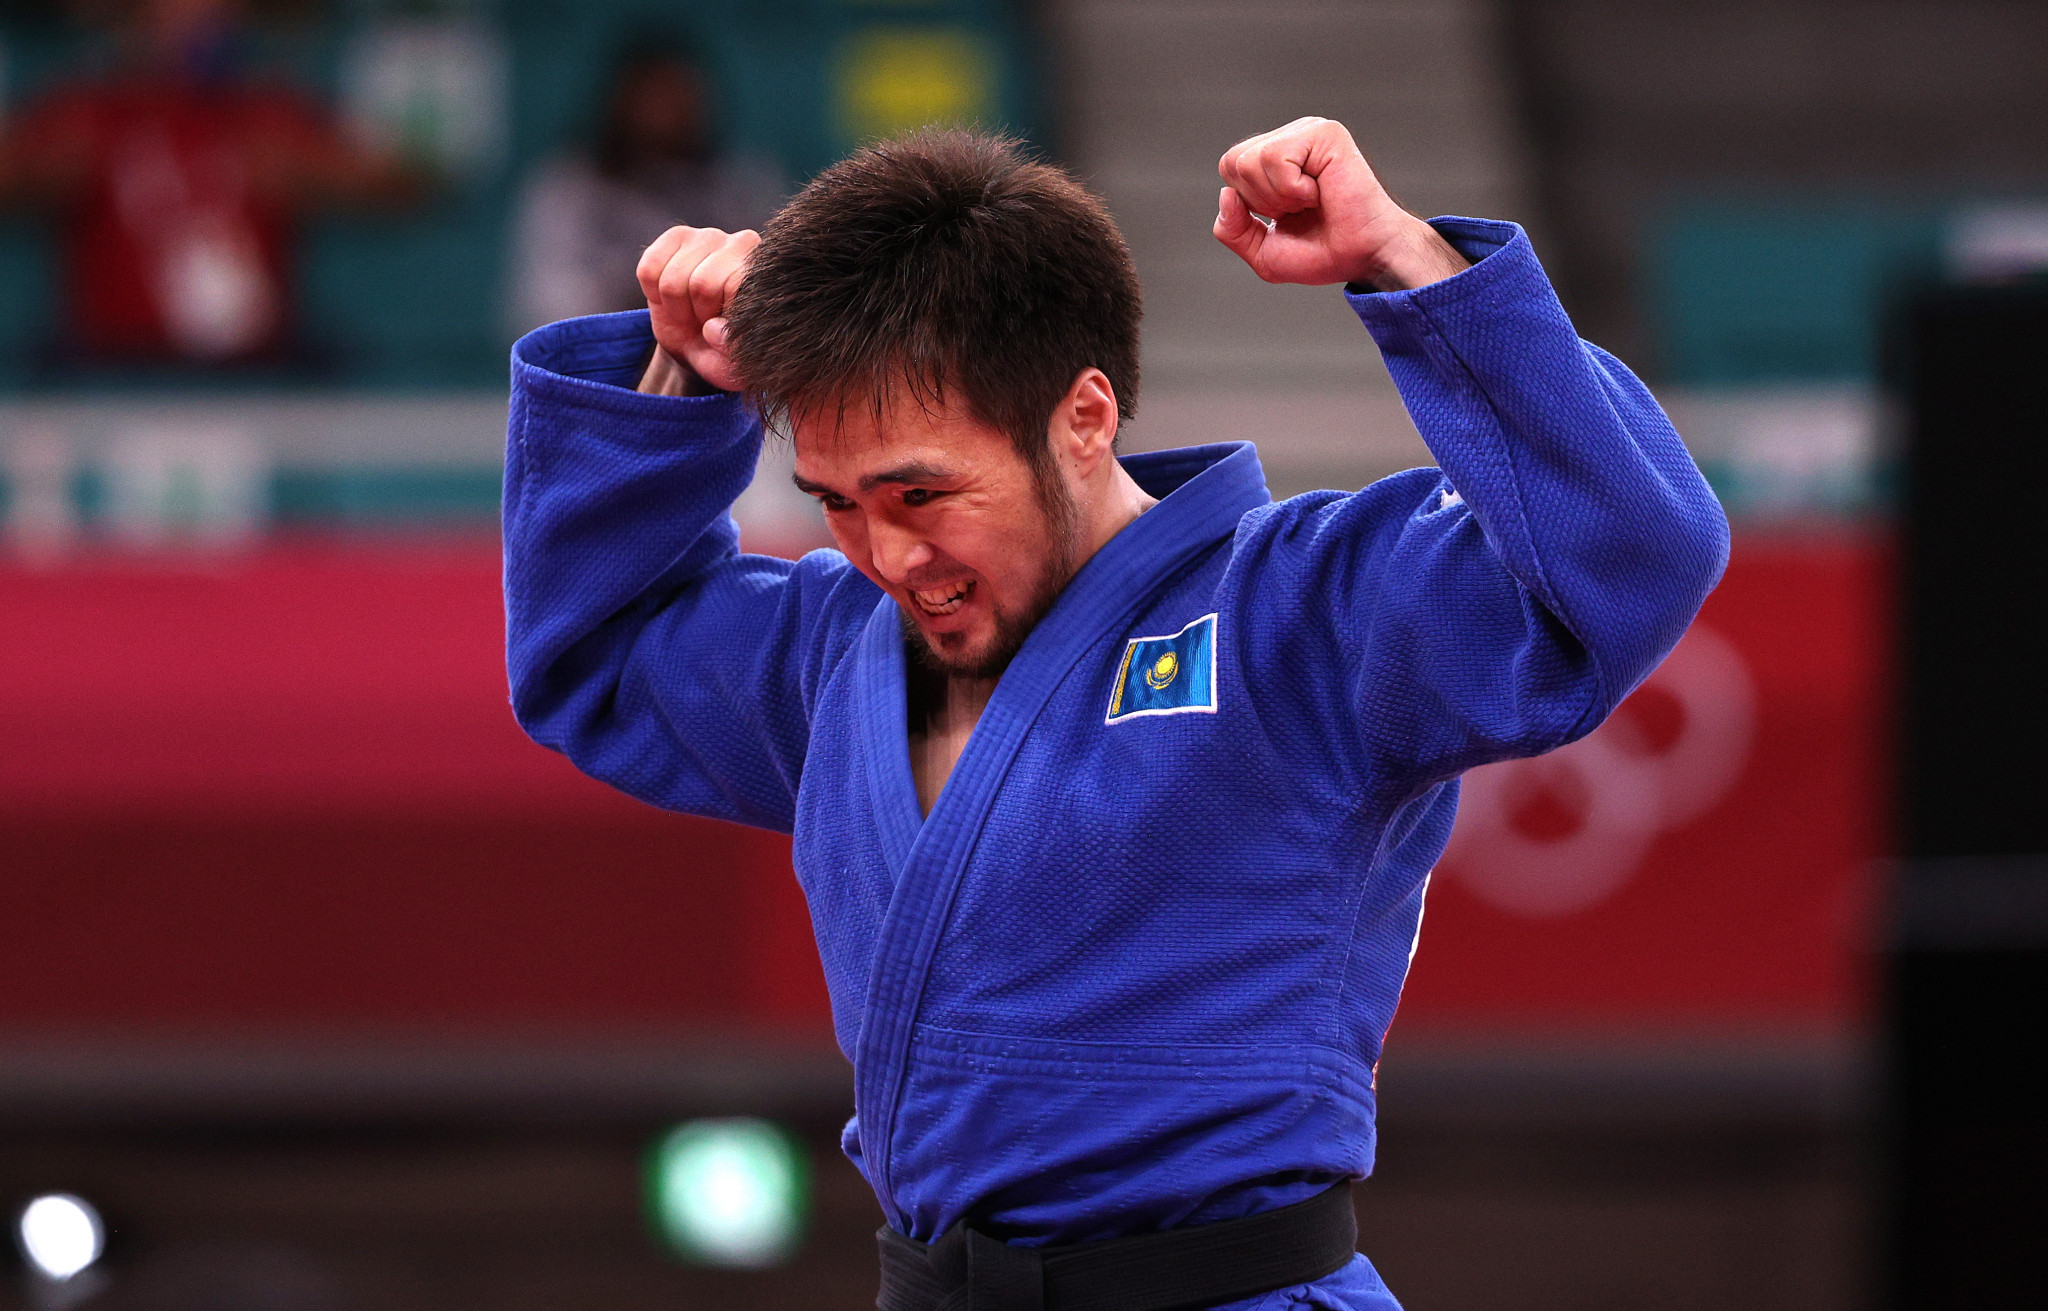 Kazakhstan's Olympic bronze medallist Yeldos Smetov has been left unseeded for the Tel Aviv Grand Slam after moving up to the men's under-66kg division ©Getty Images